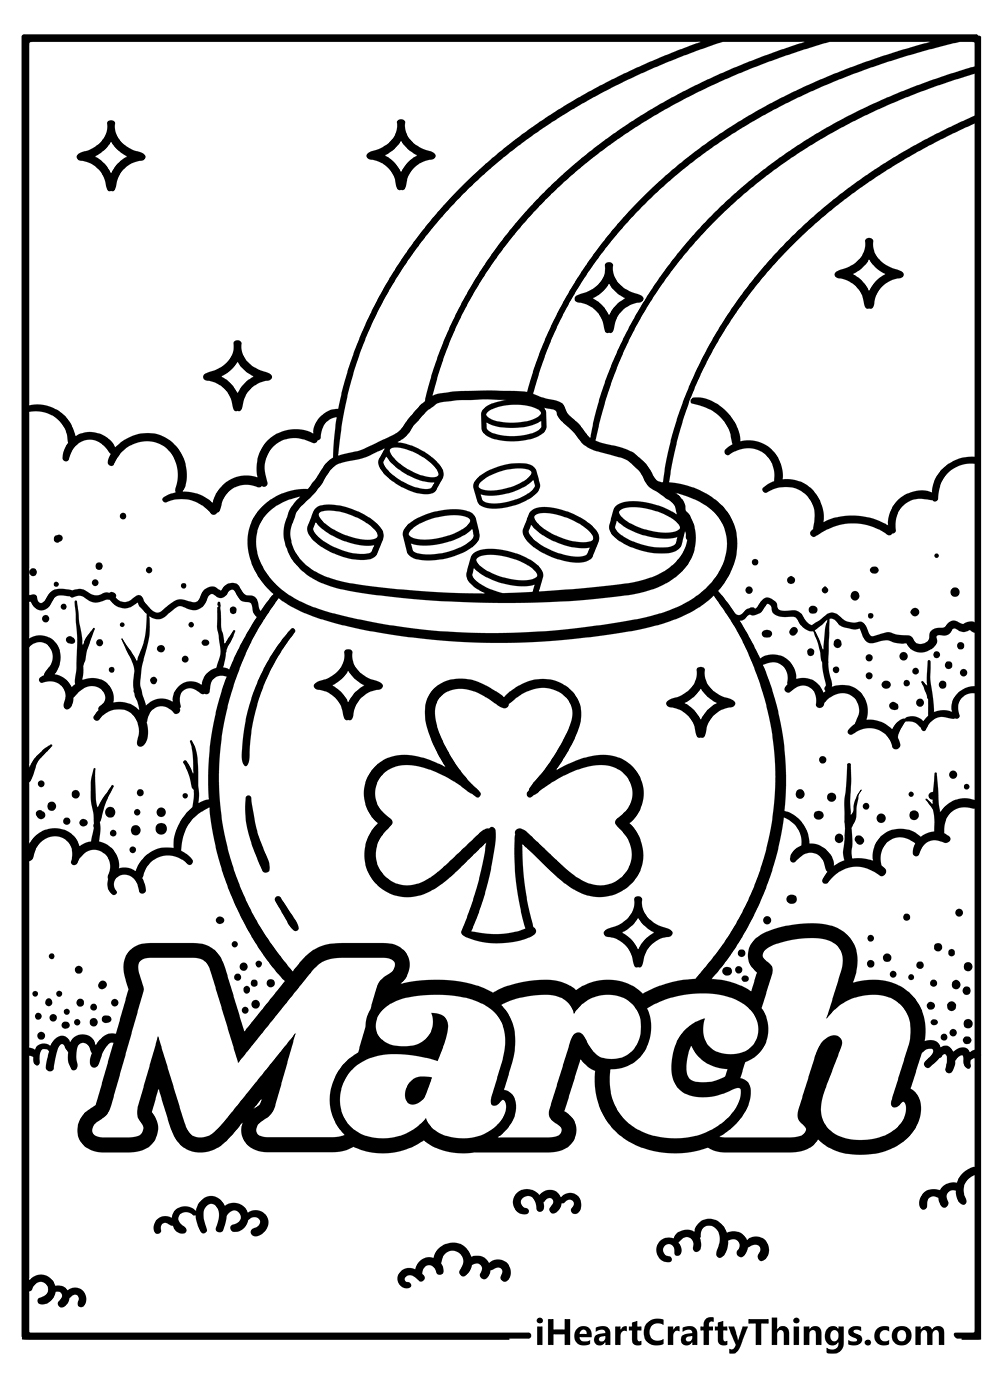 Free March Coloring Pages Home Design Ideas